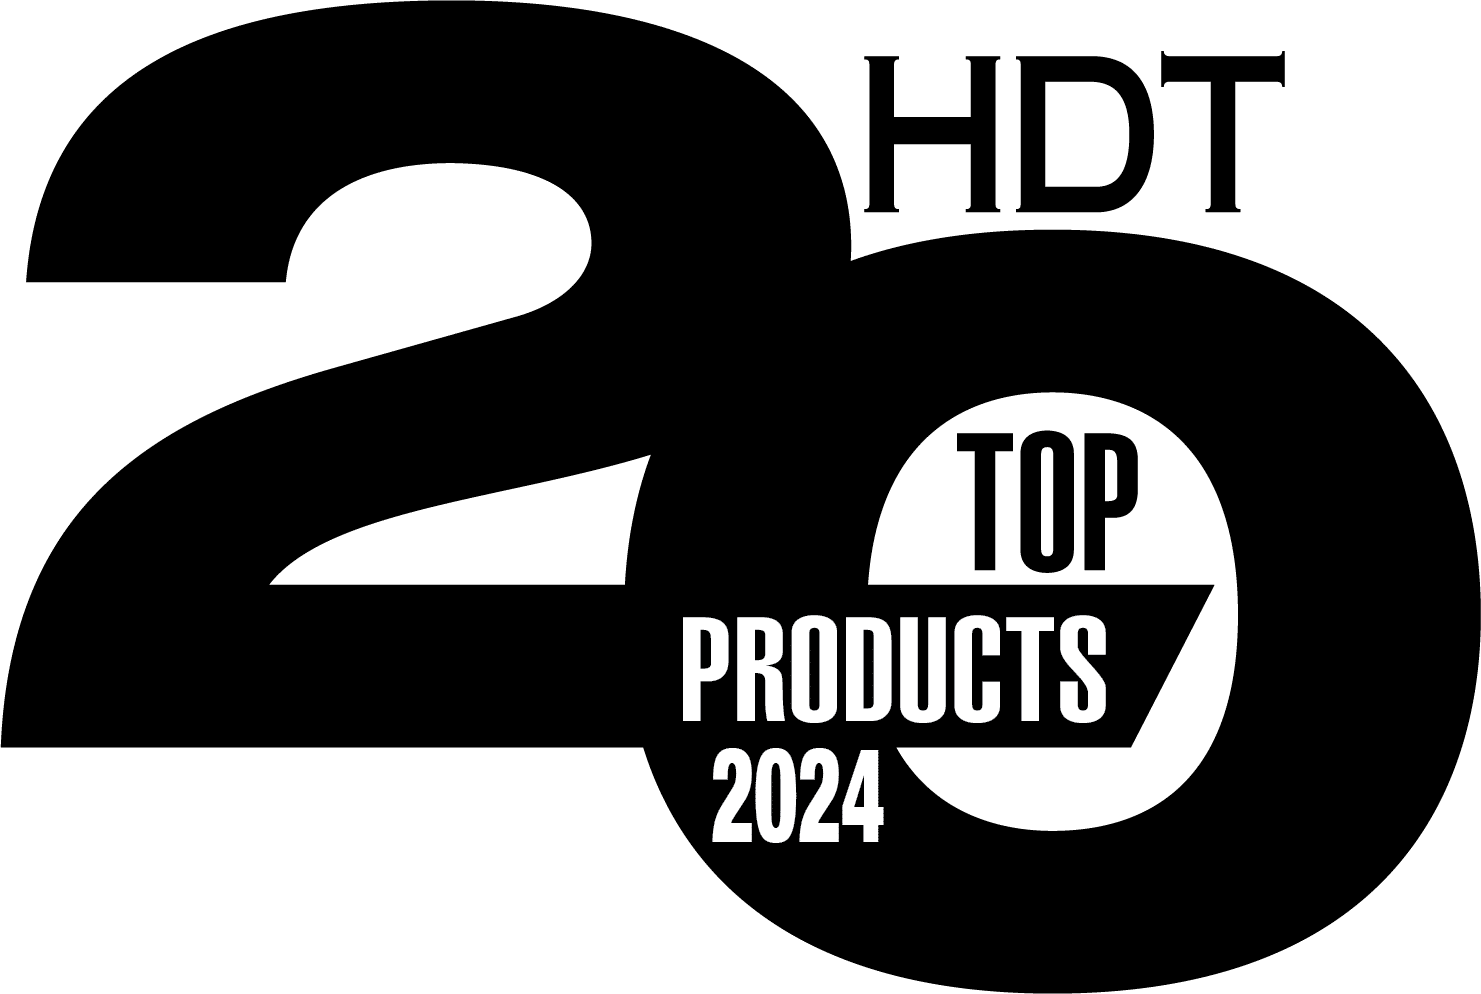 HDT Top 20 Products Award logo for Heavy Duty Trucking